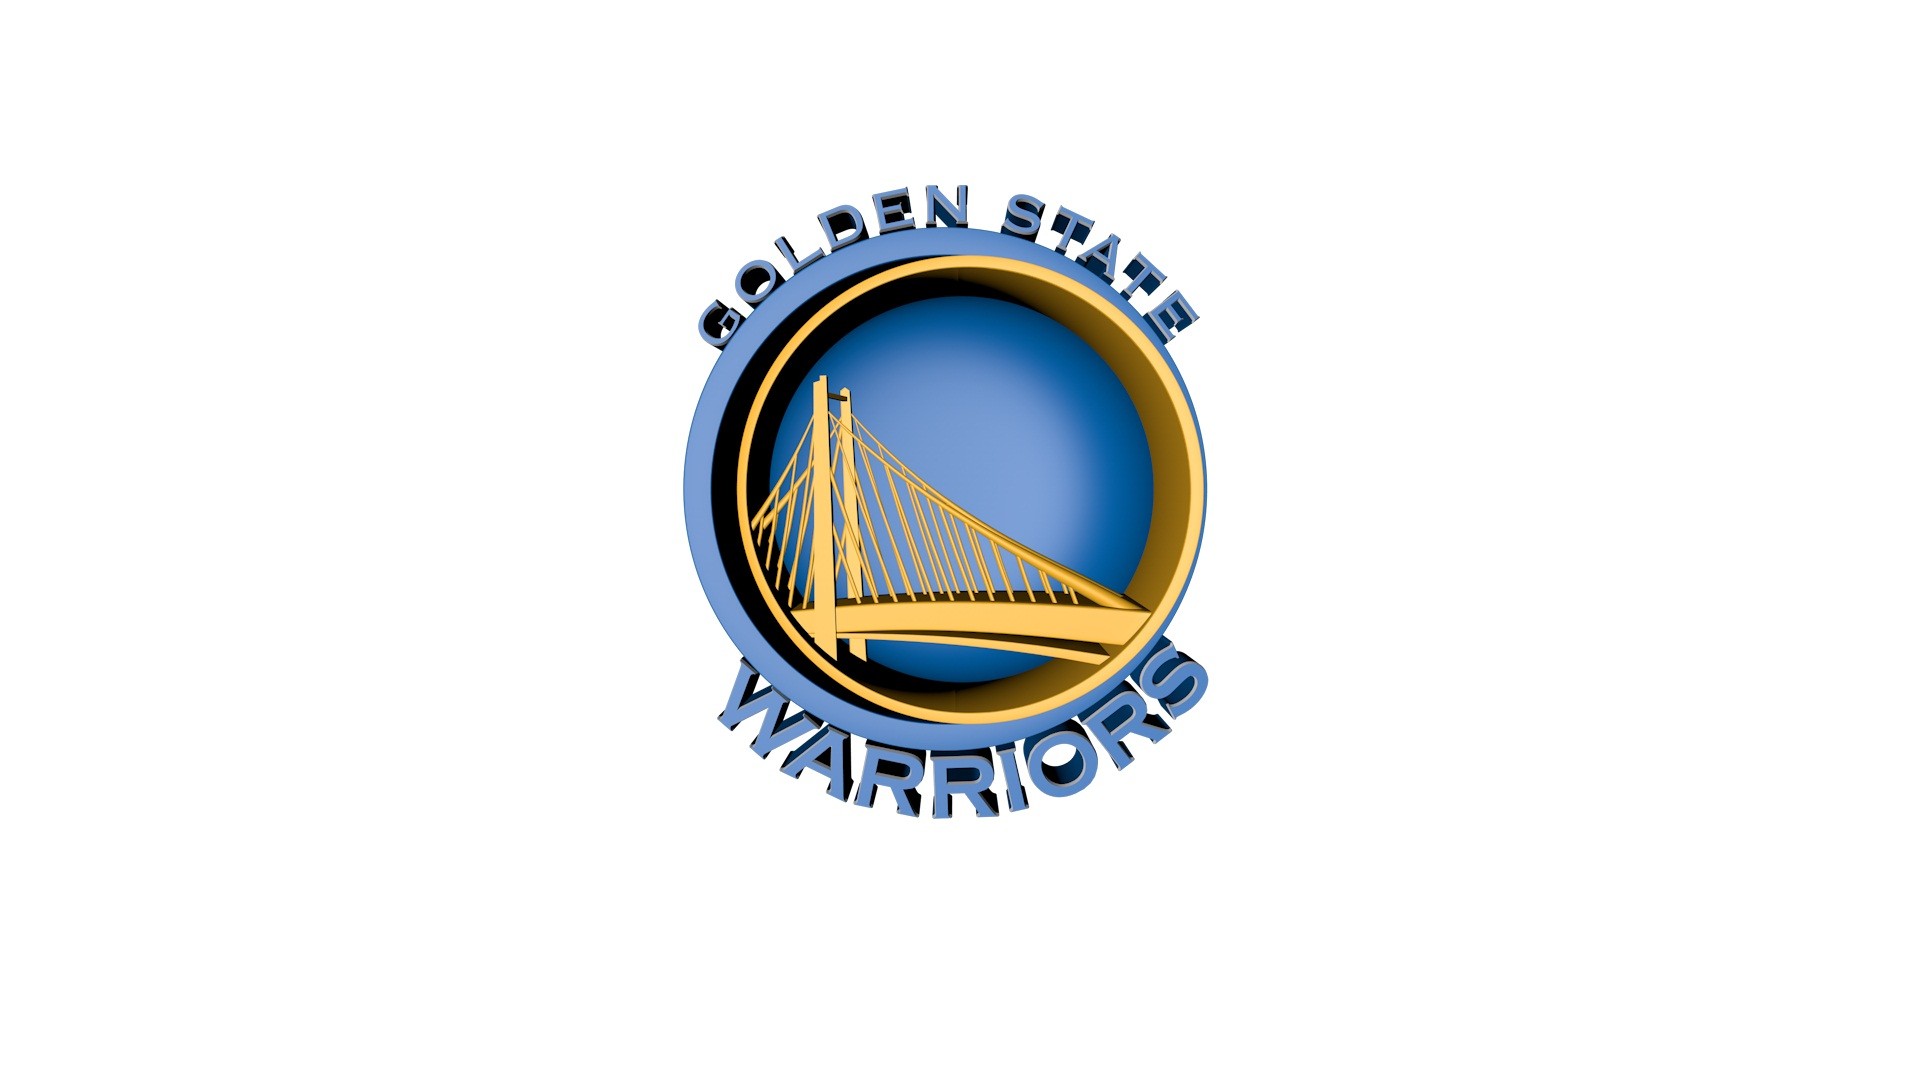 Wallpaper Desktop Golden State Warriors Logo HD with image dimensions 1920x1080 pixel. You can make this wallpaper for your Desktop Computer Backgrounds, Windows or Mac Screensavers, iPhone Lock screen, Tablet or Android and another Mobile Phone device